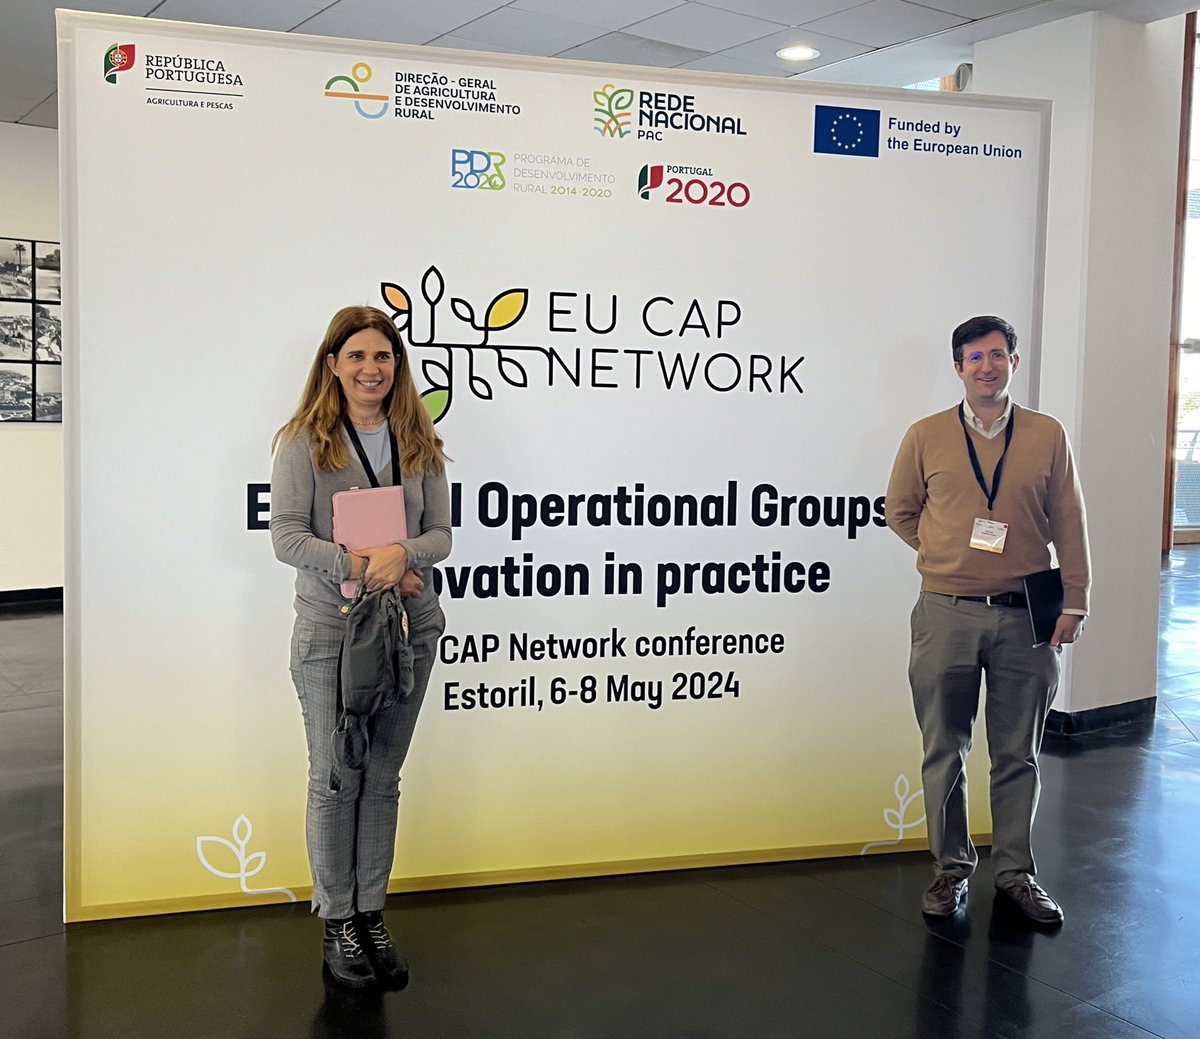 Excited to be part of the #OGconference organized by @eucapnetwork, fostering knowledge exchange and innovation among European #Agrifood actors. #AKIS @cei_A3 @EU_Commission @EIPAGRI_SP